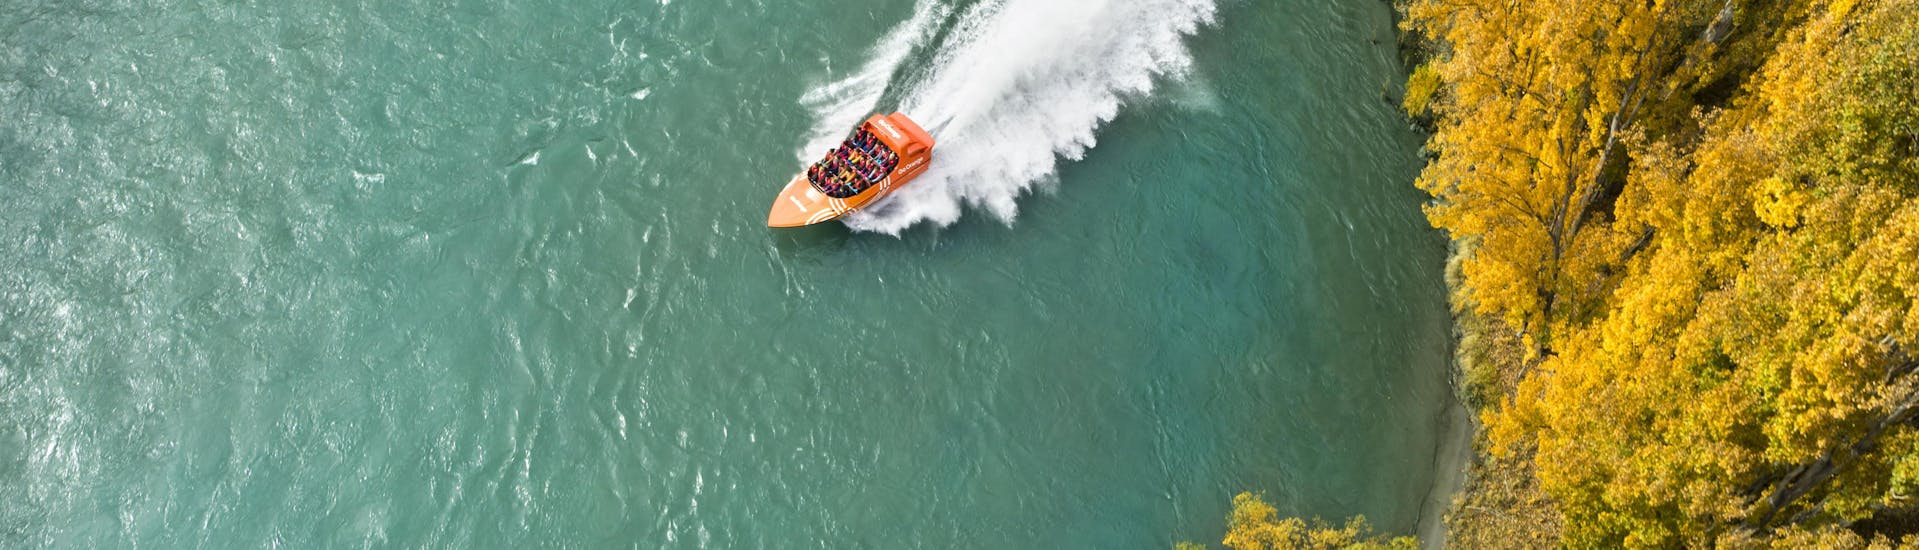 A jet boat is making a 360° spi during Jet Boat Tour from Queenstown organized by Go Orange